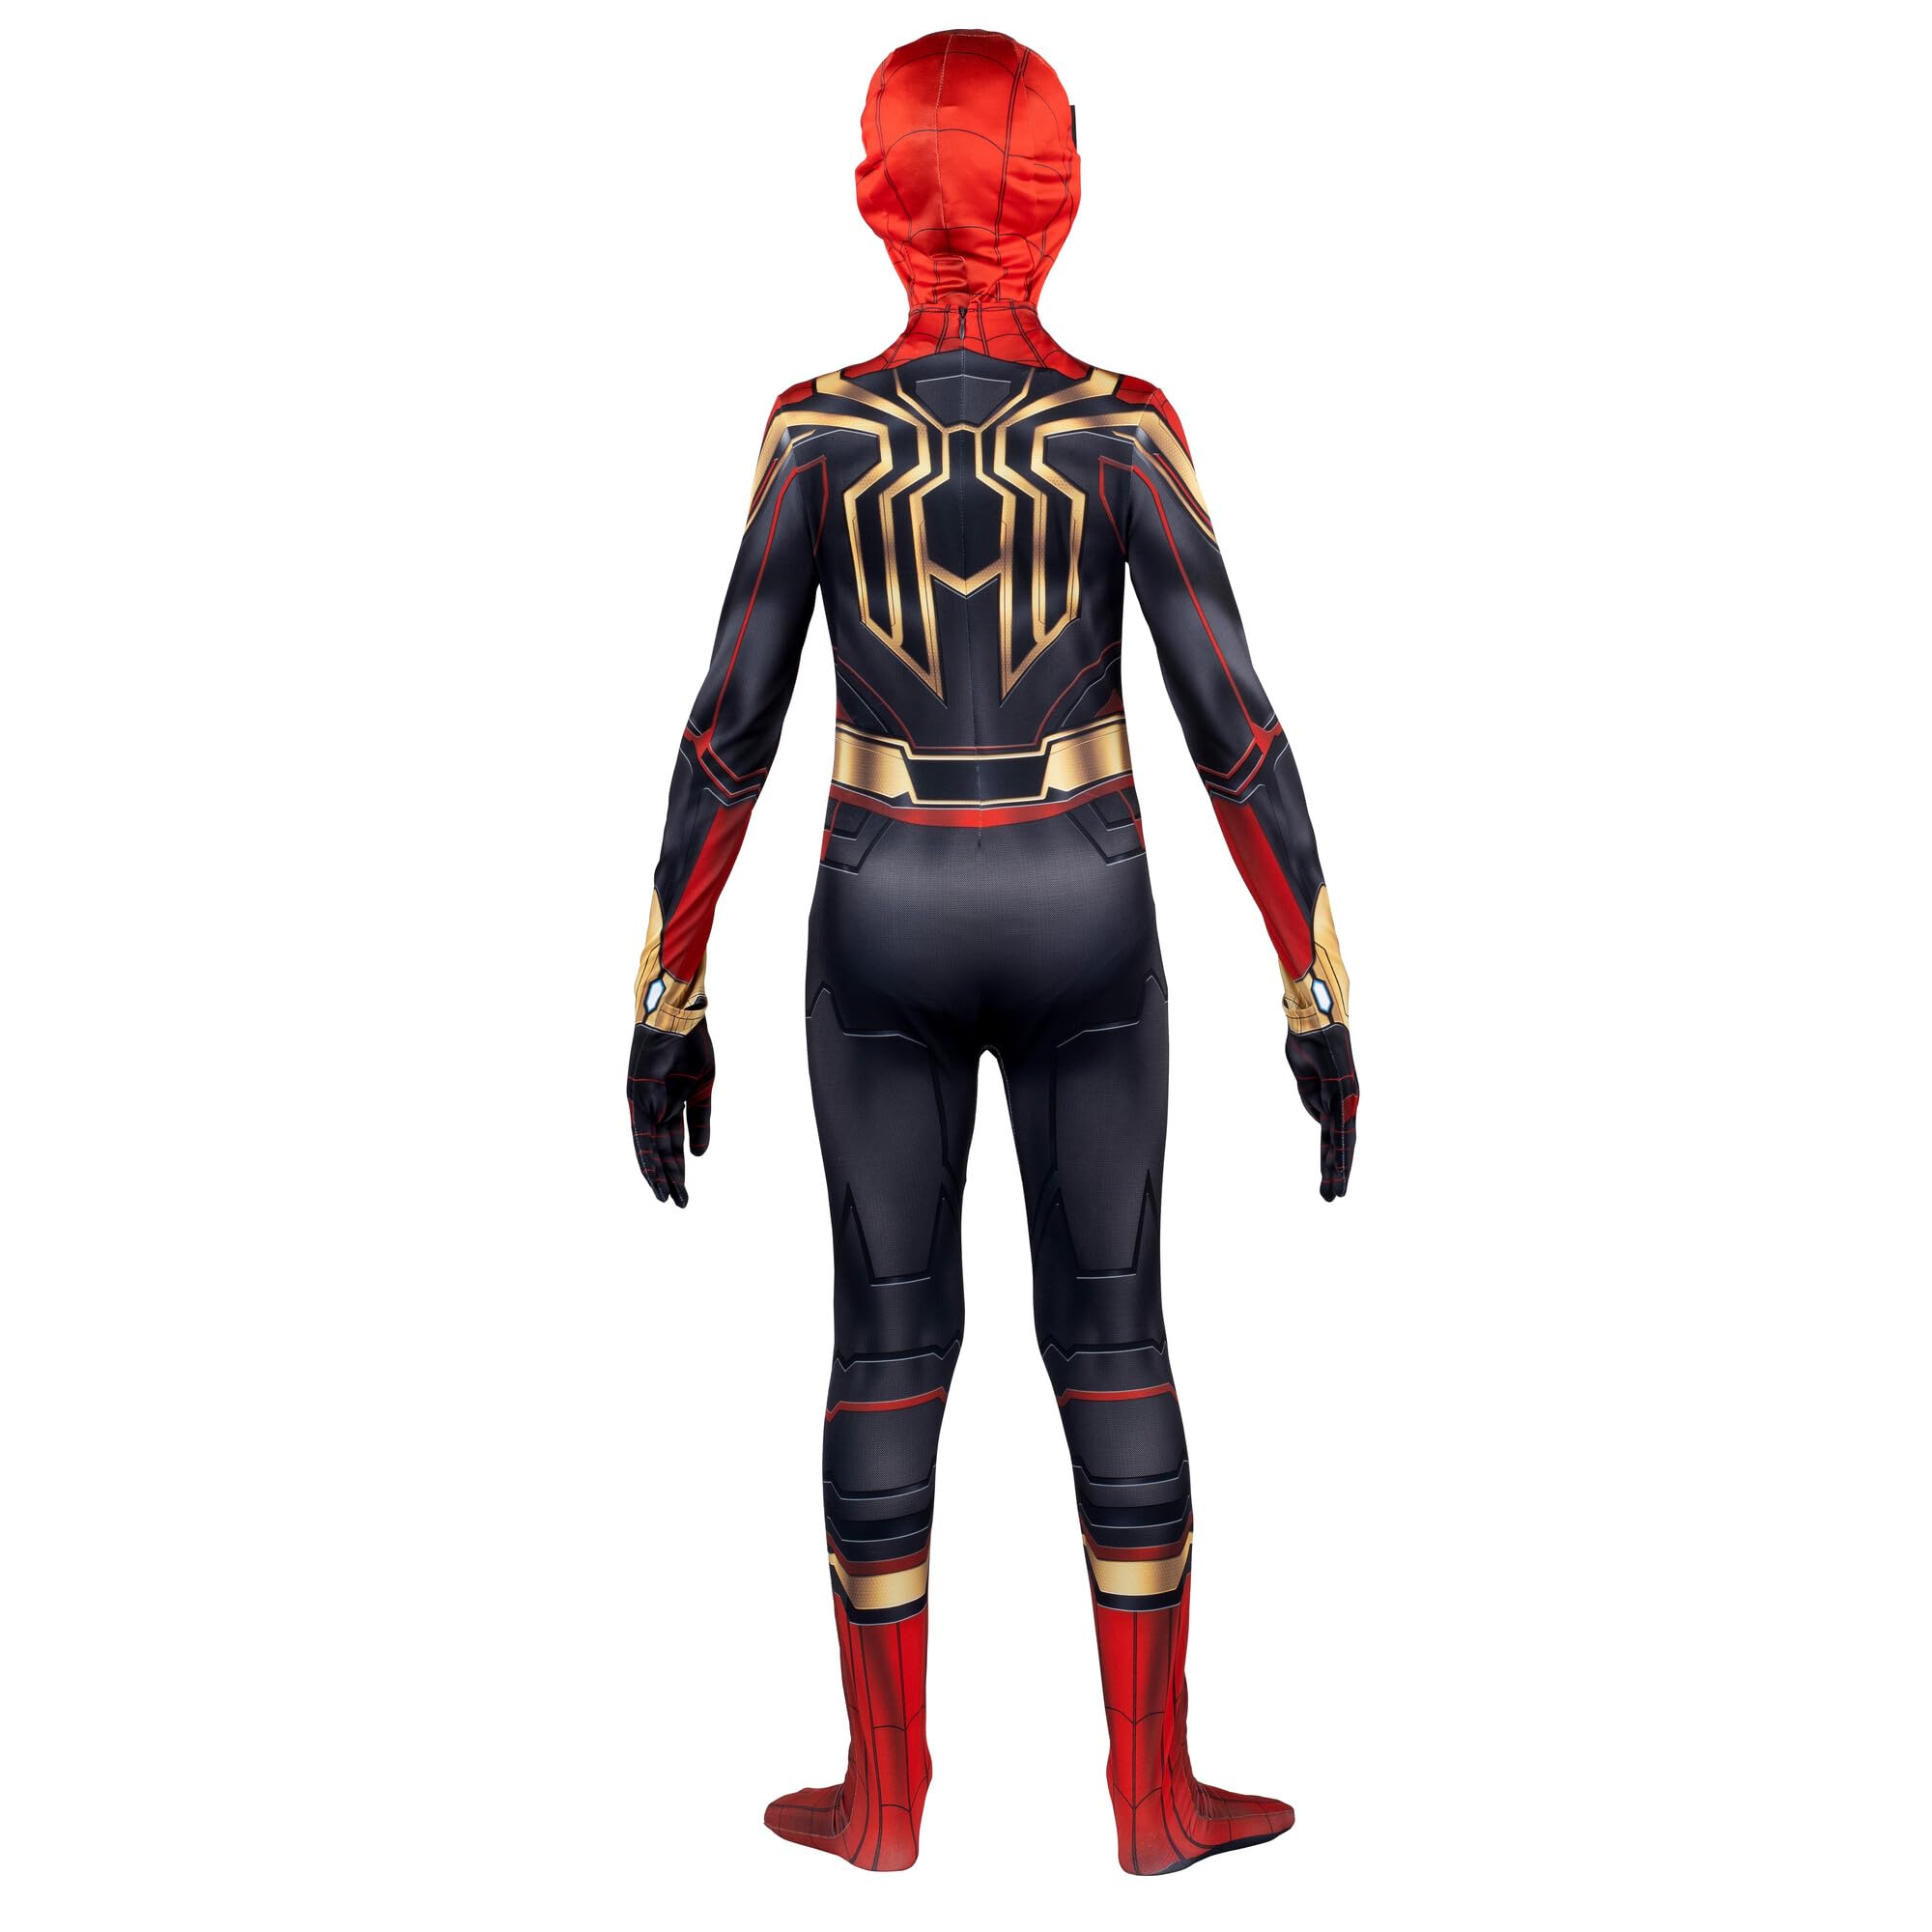 MARVEL Integrated Spider-Man Official Youth Deluxe Zentai Suit - Spandex Jumpsuit with Printed Design and Spandex Detachable Mask with Plastic Eyes